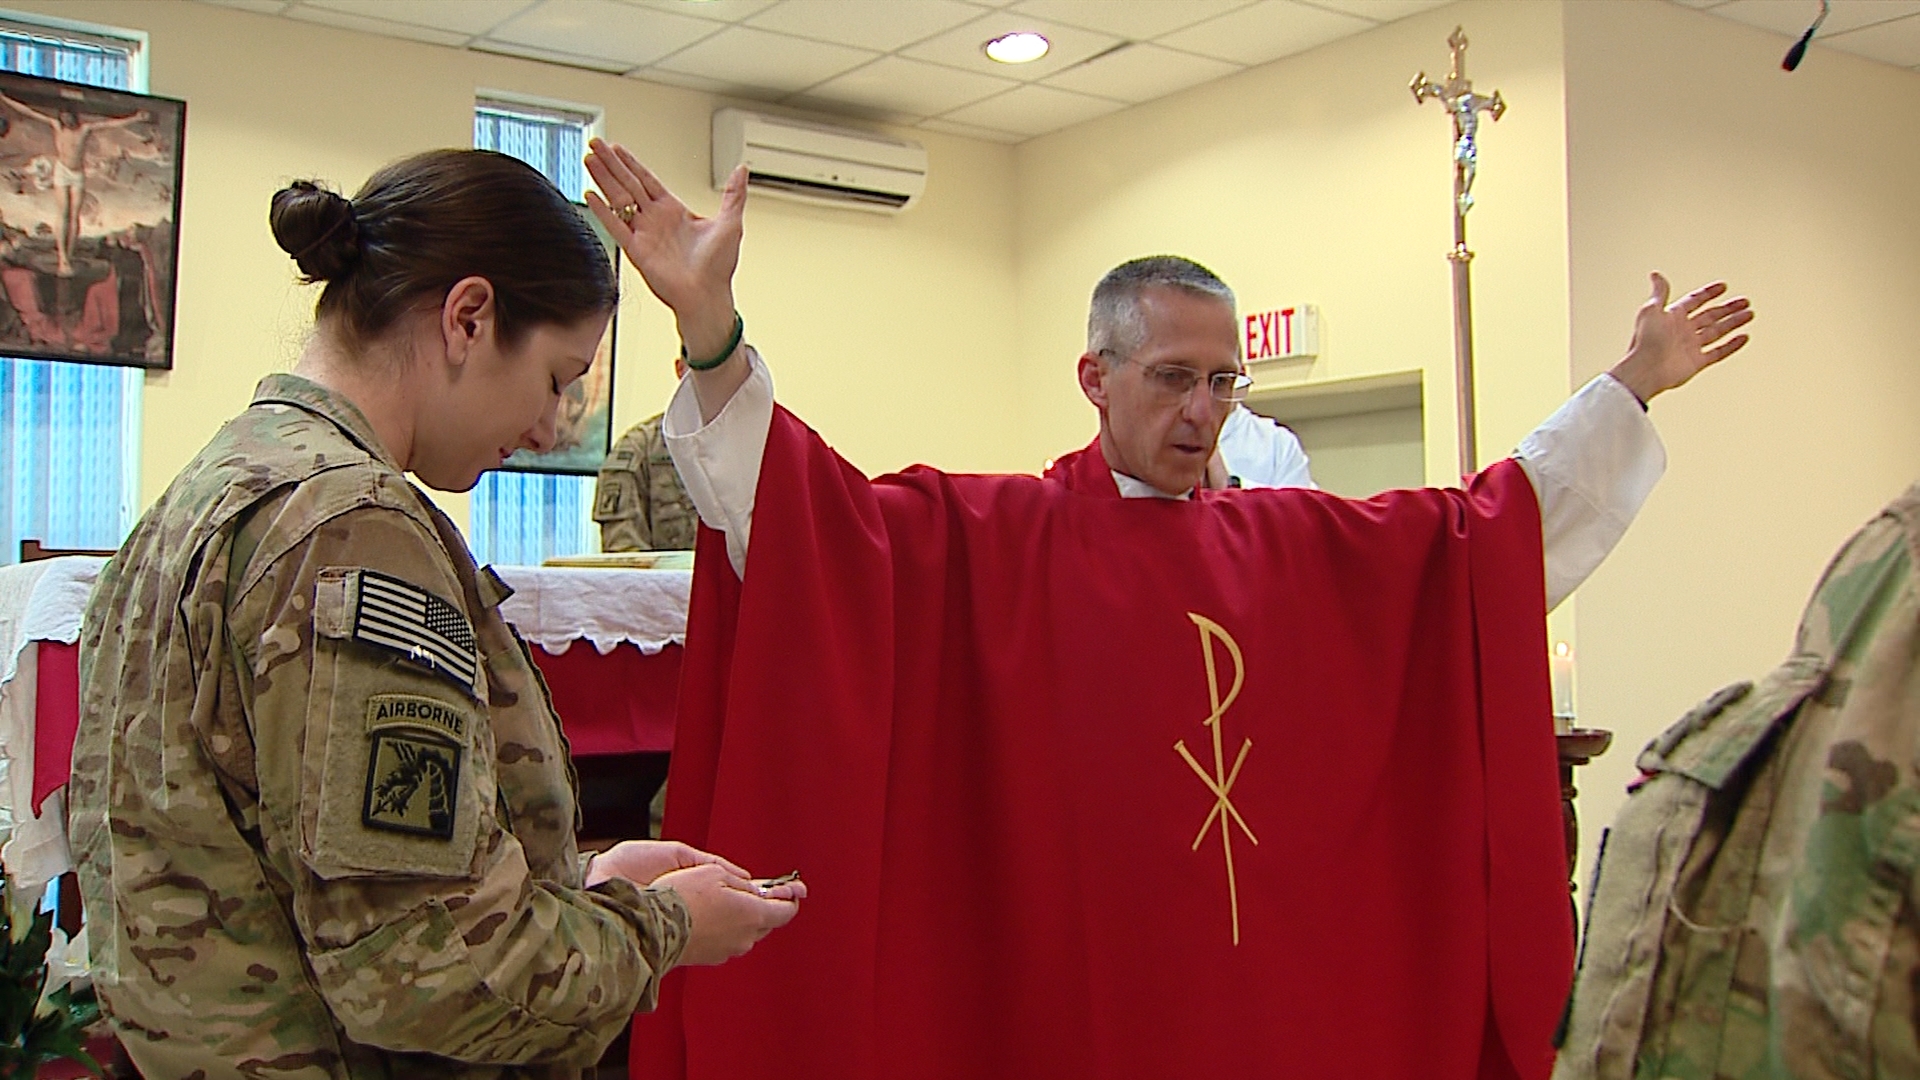 Father Paul K. Hurley celebrating Mass last year with deployed U.S. Military personnel in Afghanistan. Photo courtesy ofJourney Films.